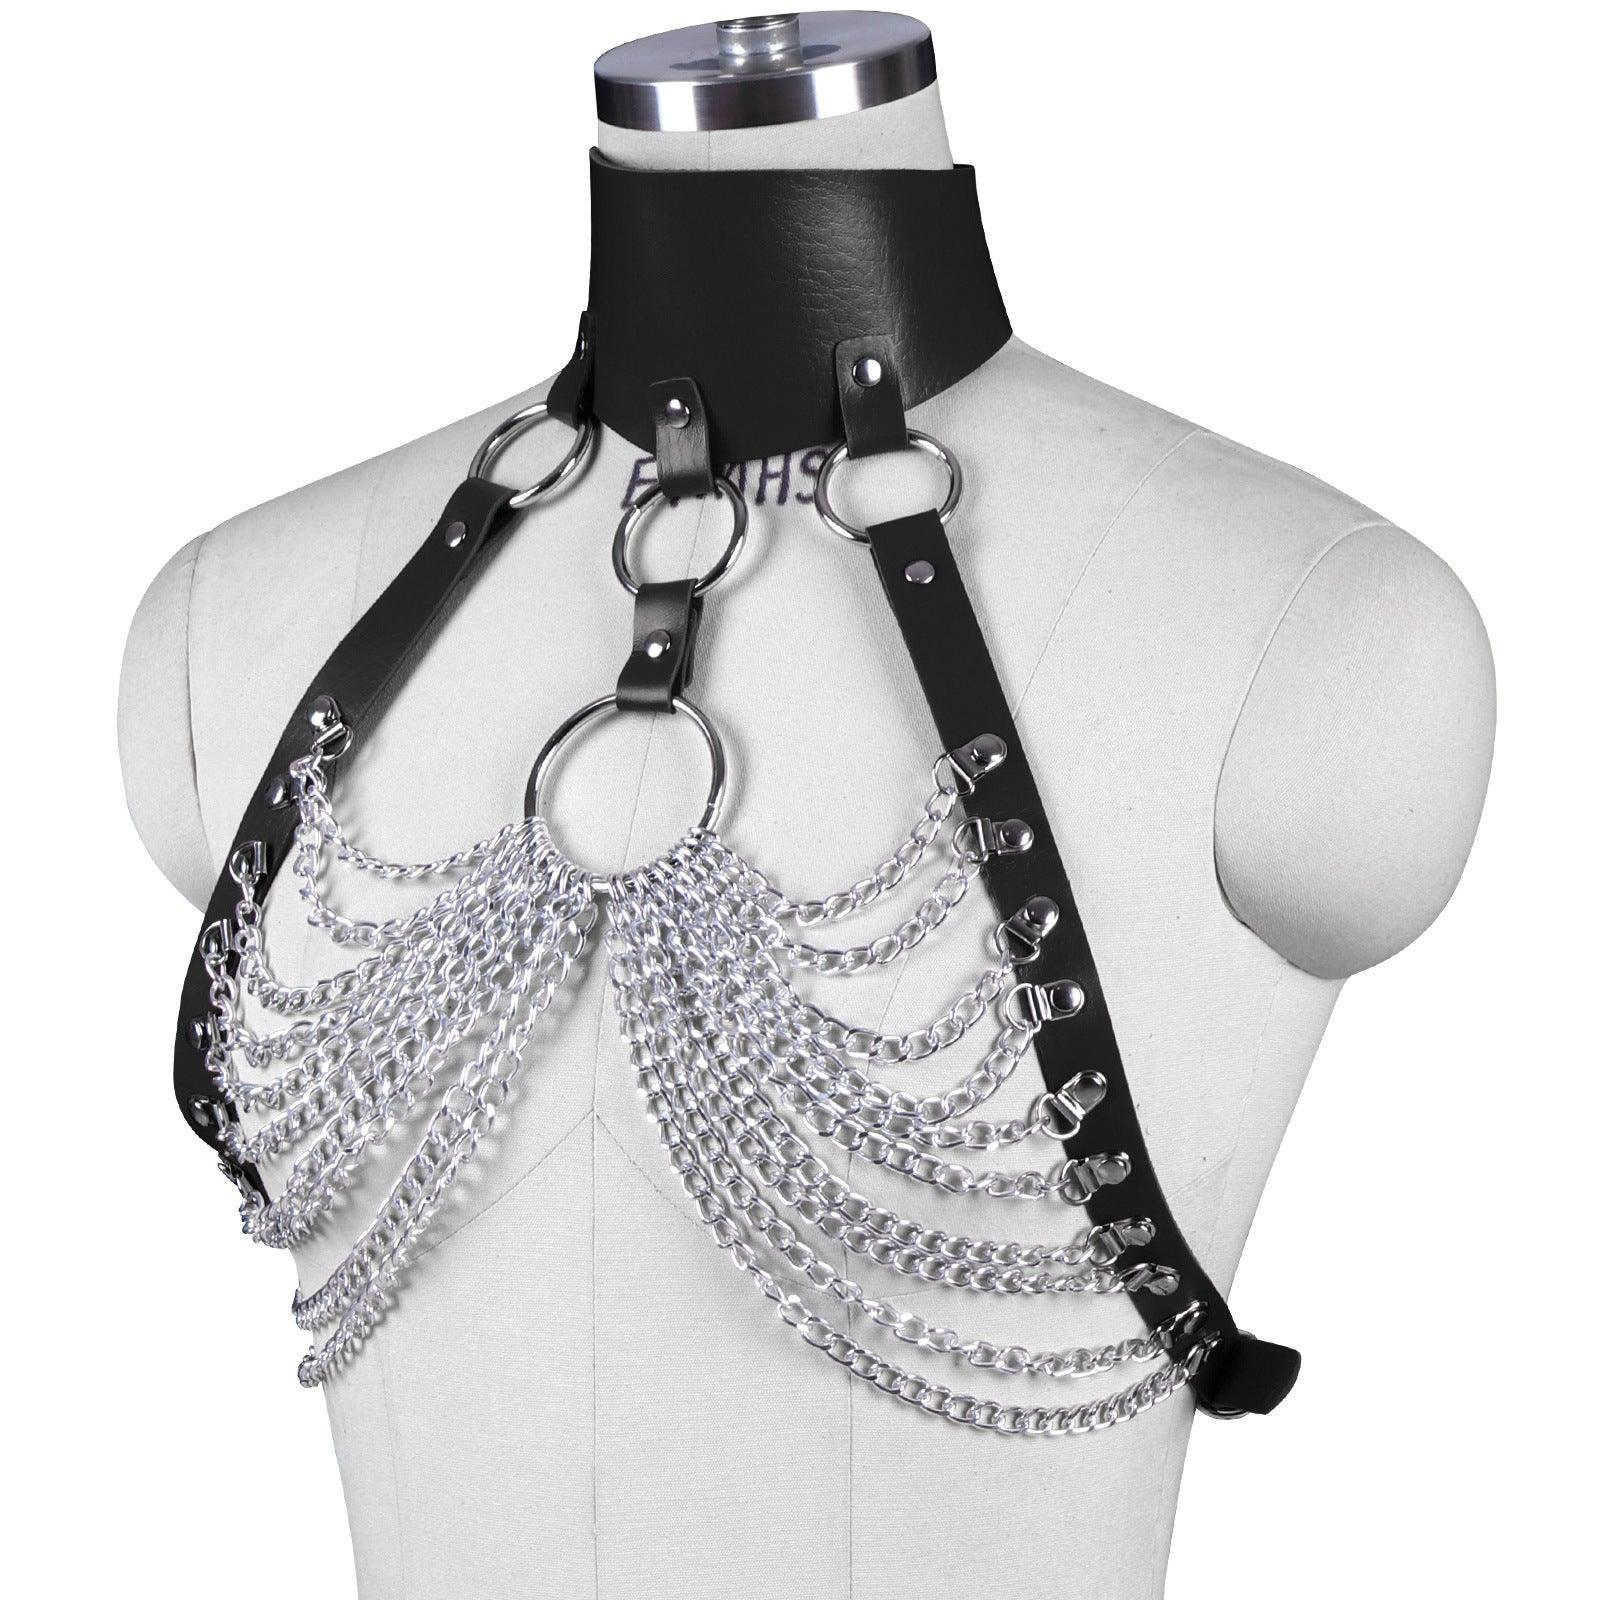 Punk Gothic Body Harnesses Leather Strap, Sexy Chain Accessories For Women - Wonder Skull